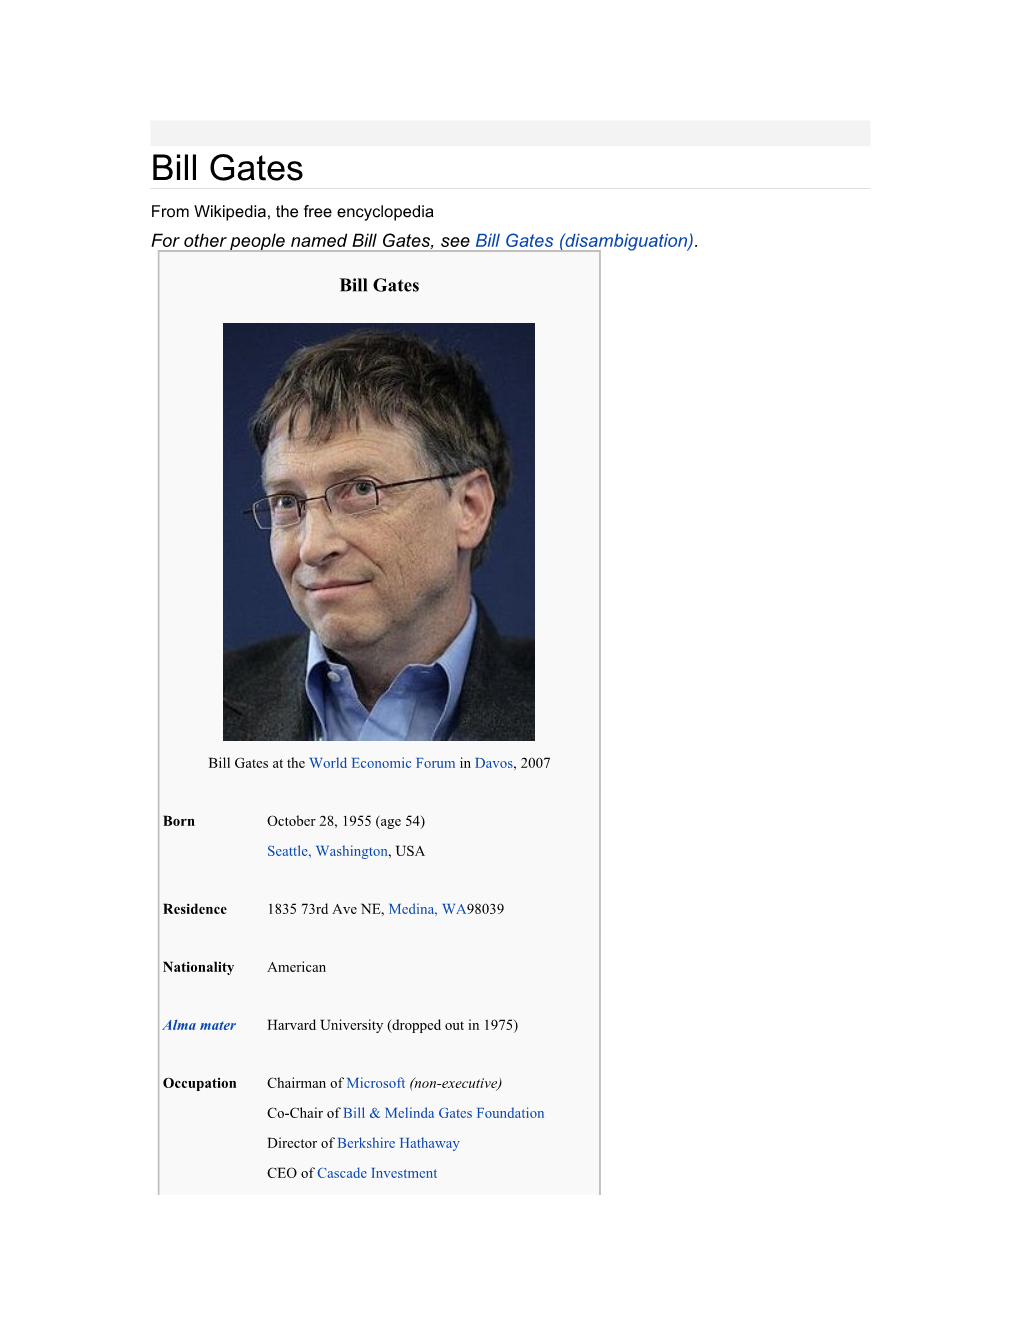 Bill Gates from Wikipedia, the Free Encyclopedia for Other People Named Bill Gates, See Bill Gates (Disambiguation)